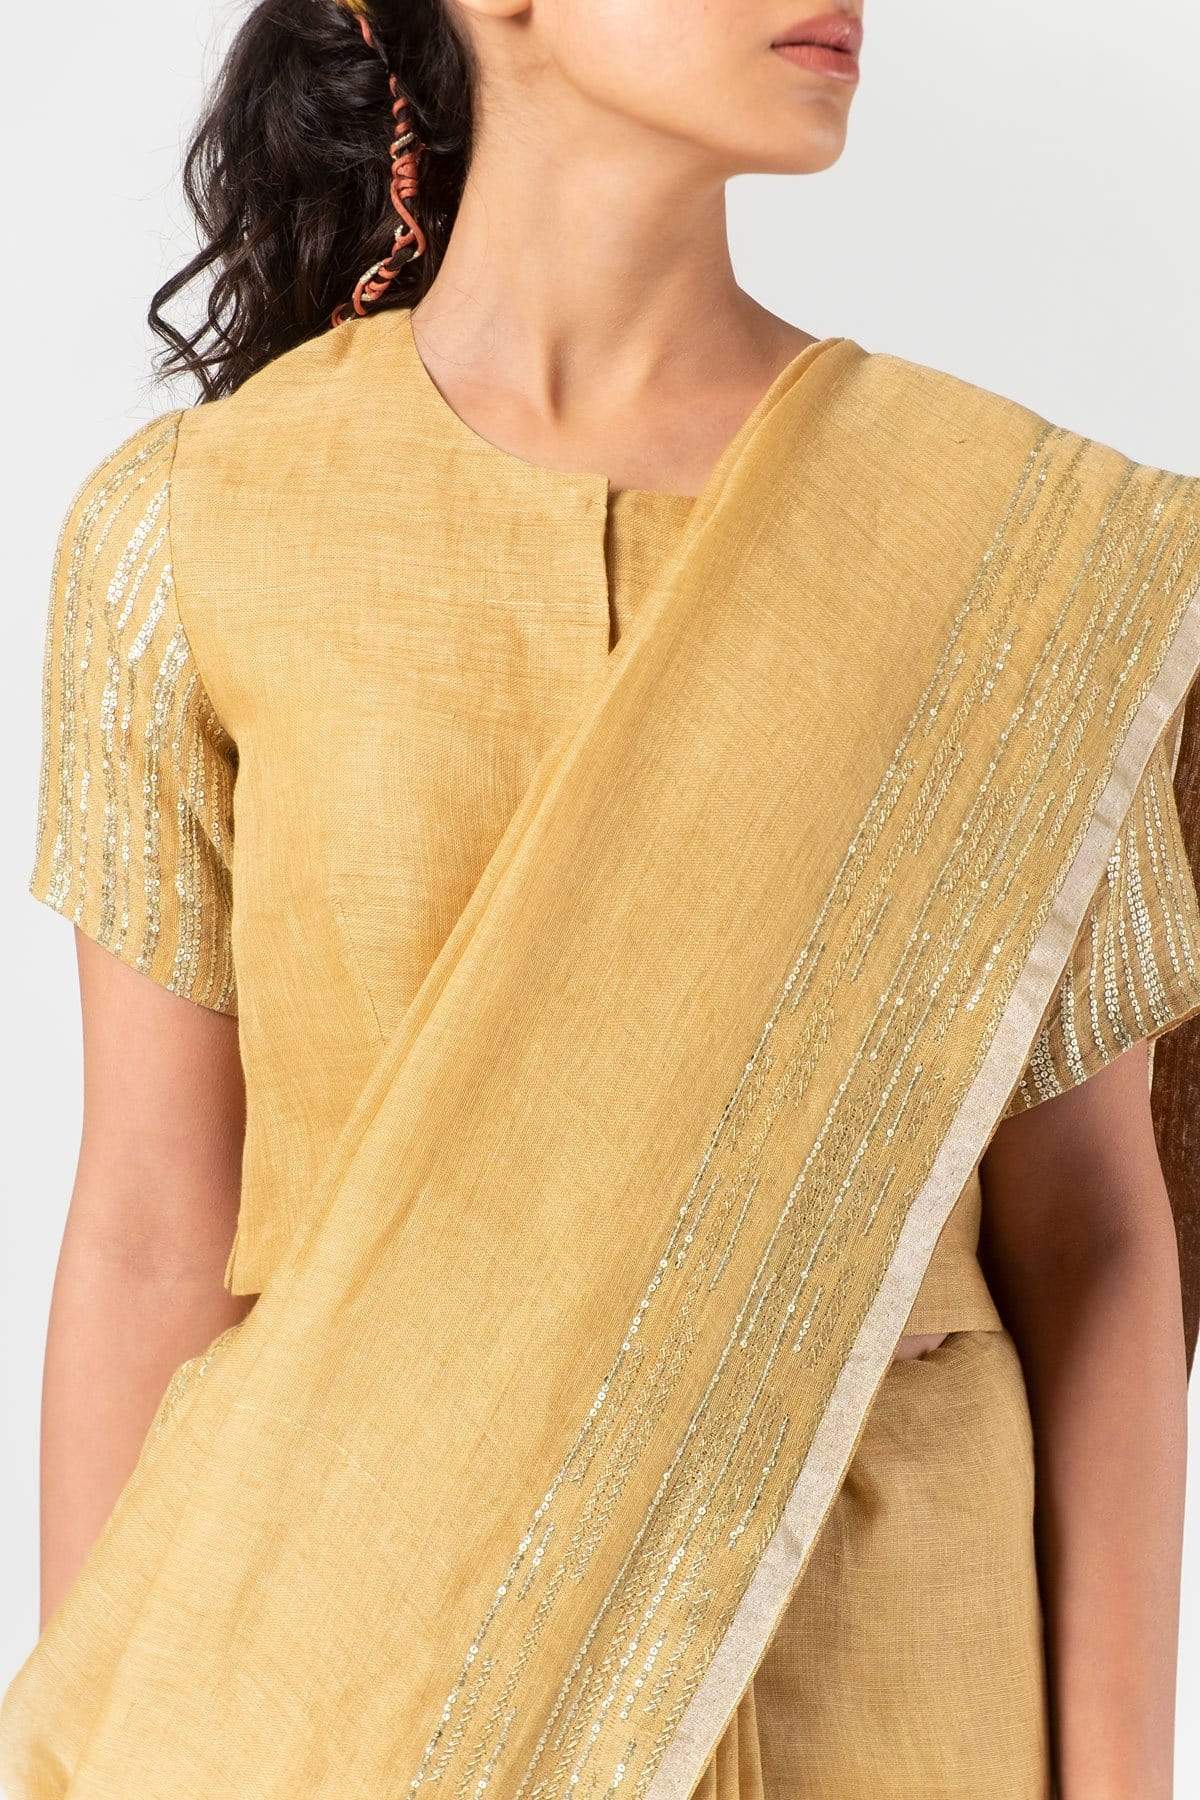 Evening Linen Saree Indian Clothing in Denver, CO, Aurora, CO, Boulder, CO, Fort Collins, CO, Colorado Springs, CO, Parker, CO, Highlands Ranch, CO, Cherry Creek, CO, Centennial, CO, and Longmont, CO. NATIONWIDE SHIPPING USA- India Fashion X